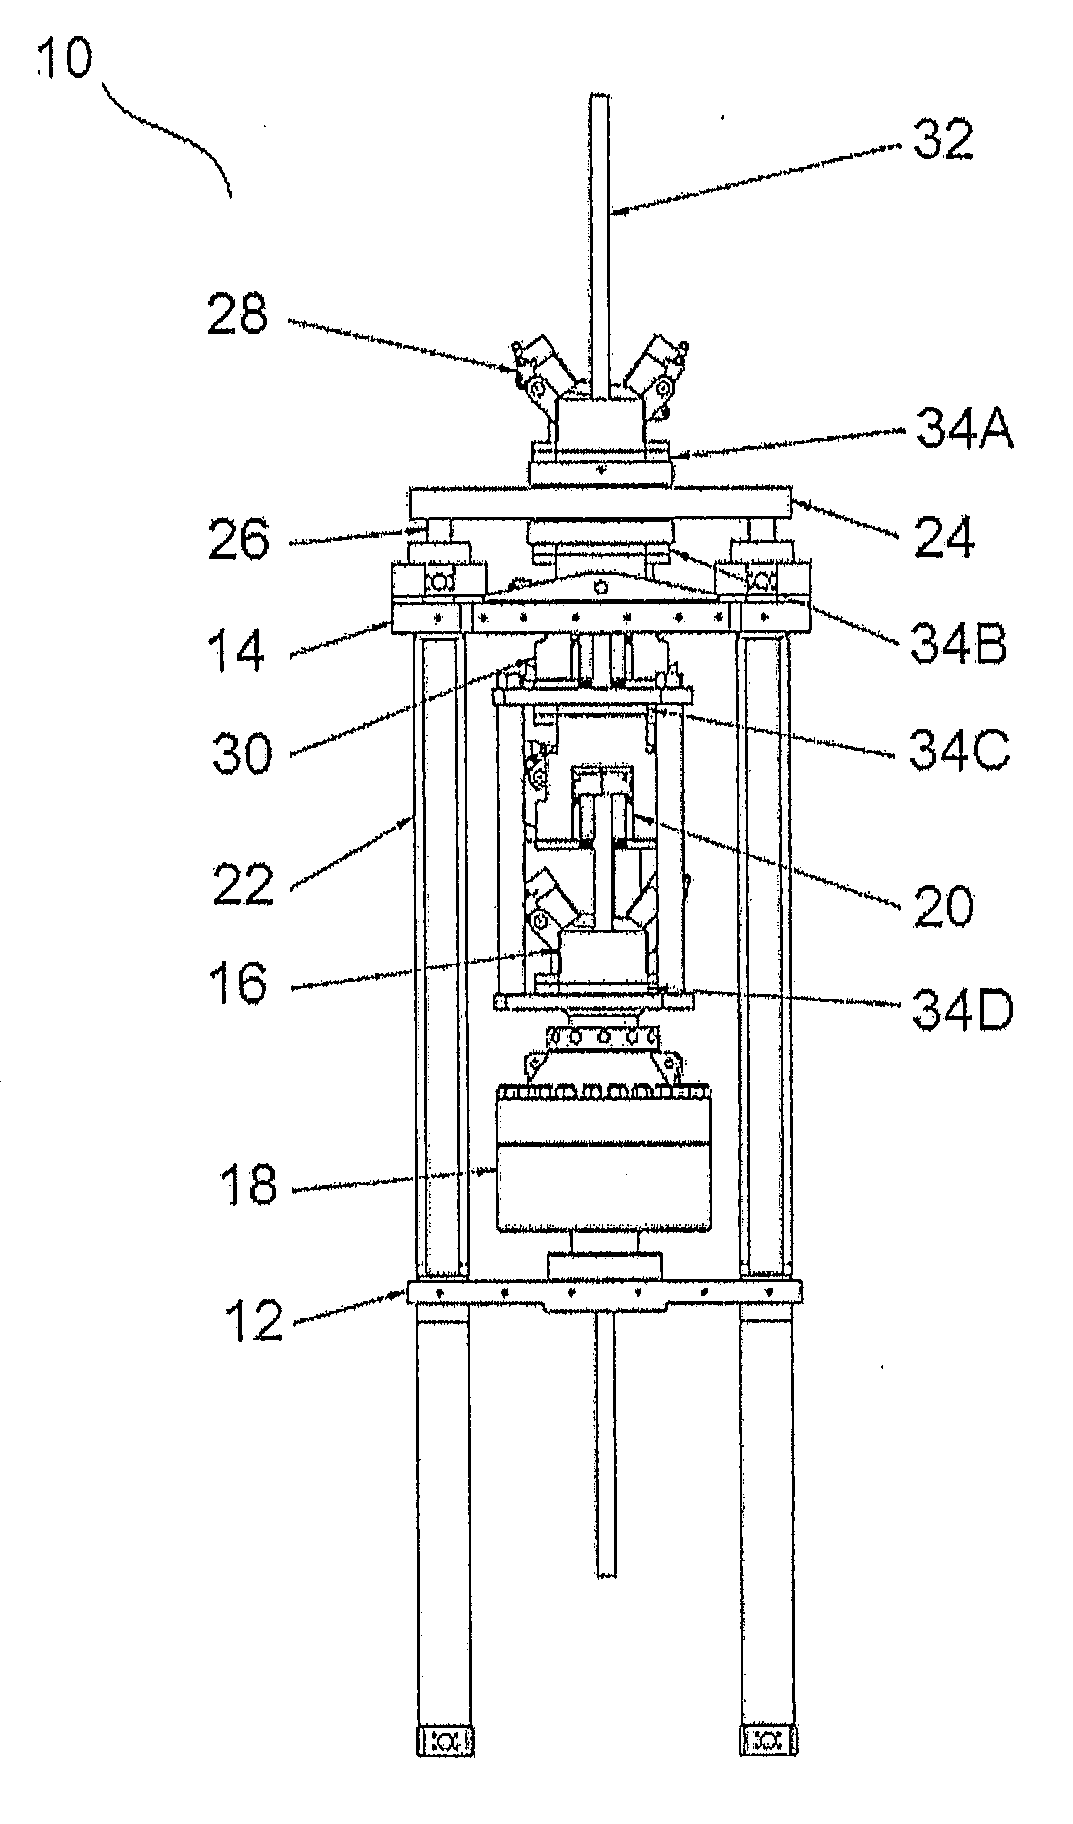 System and method for monitoring and controlling snubbing slips